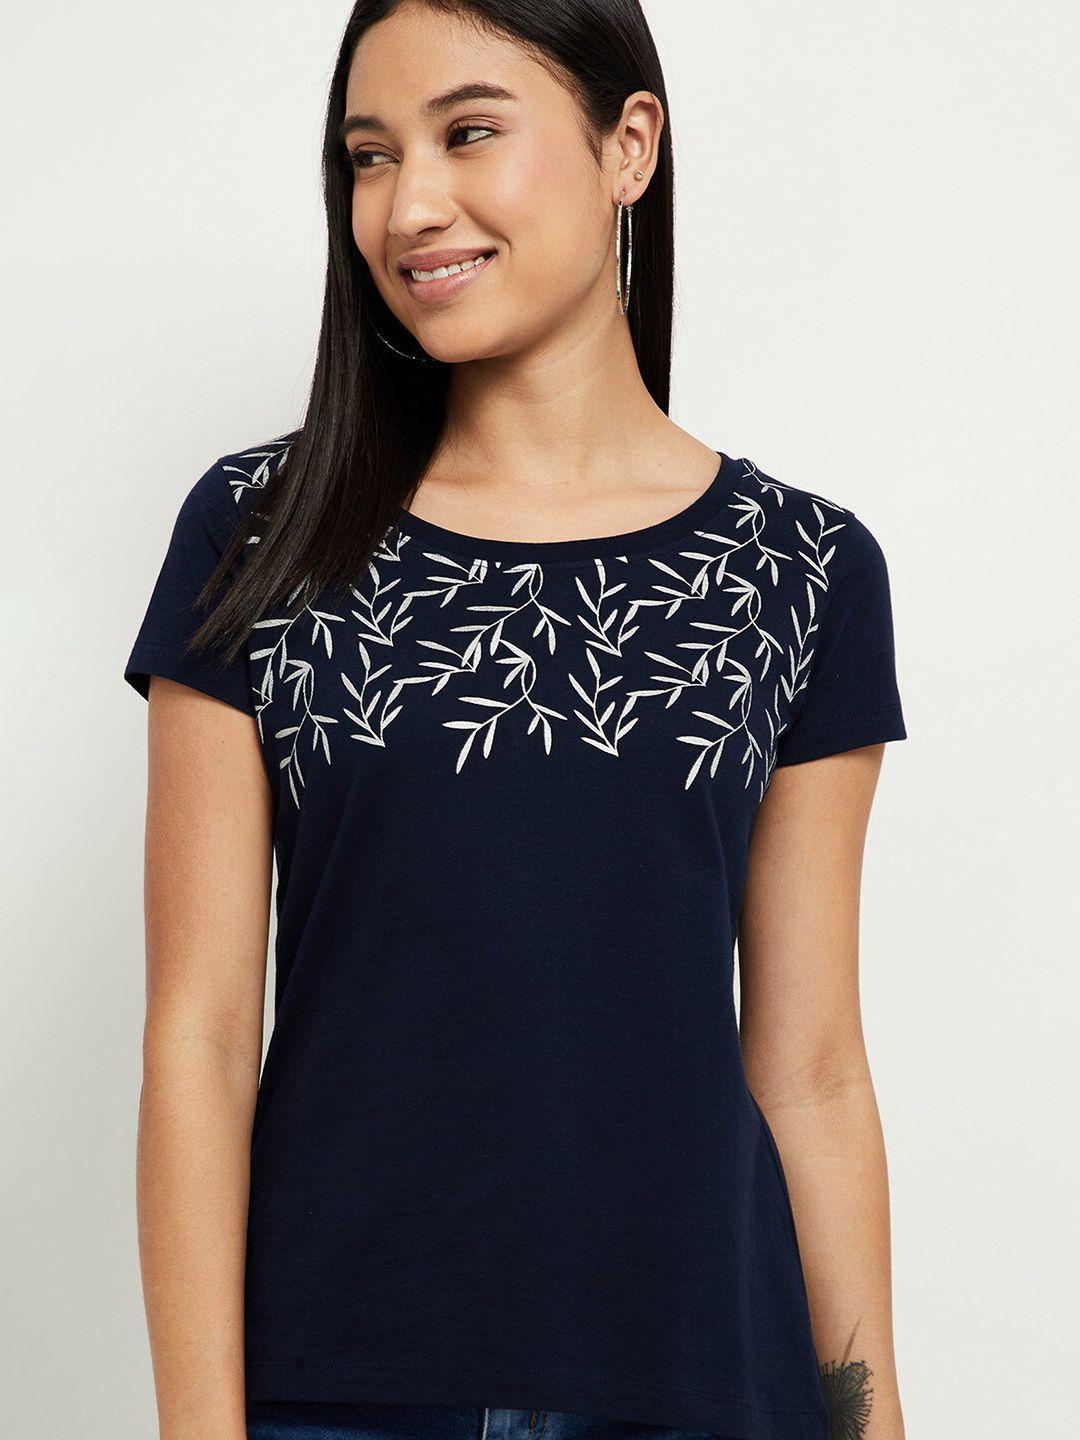 max women navy blue floral printed pure cotton t-shirt